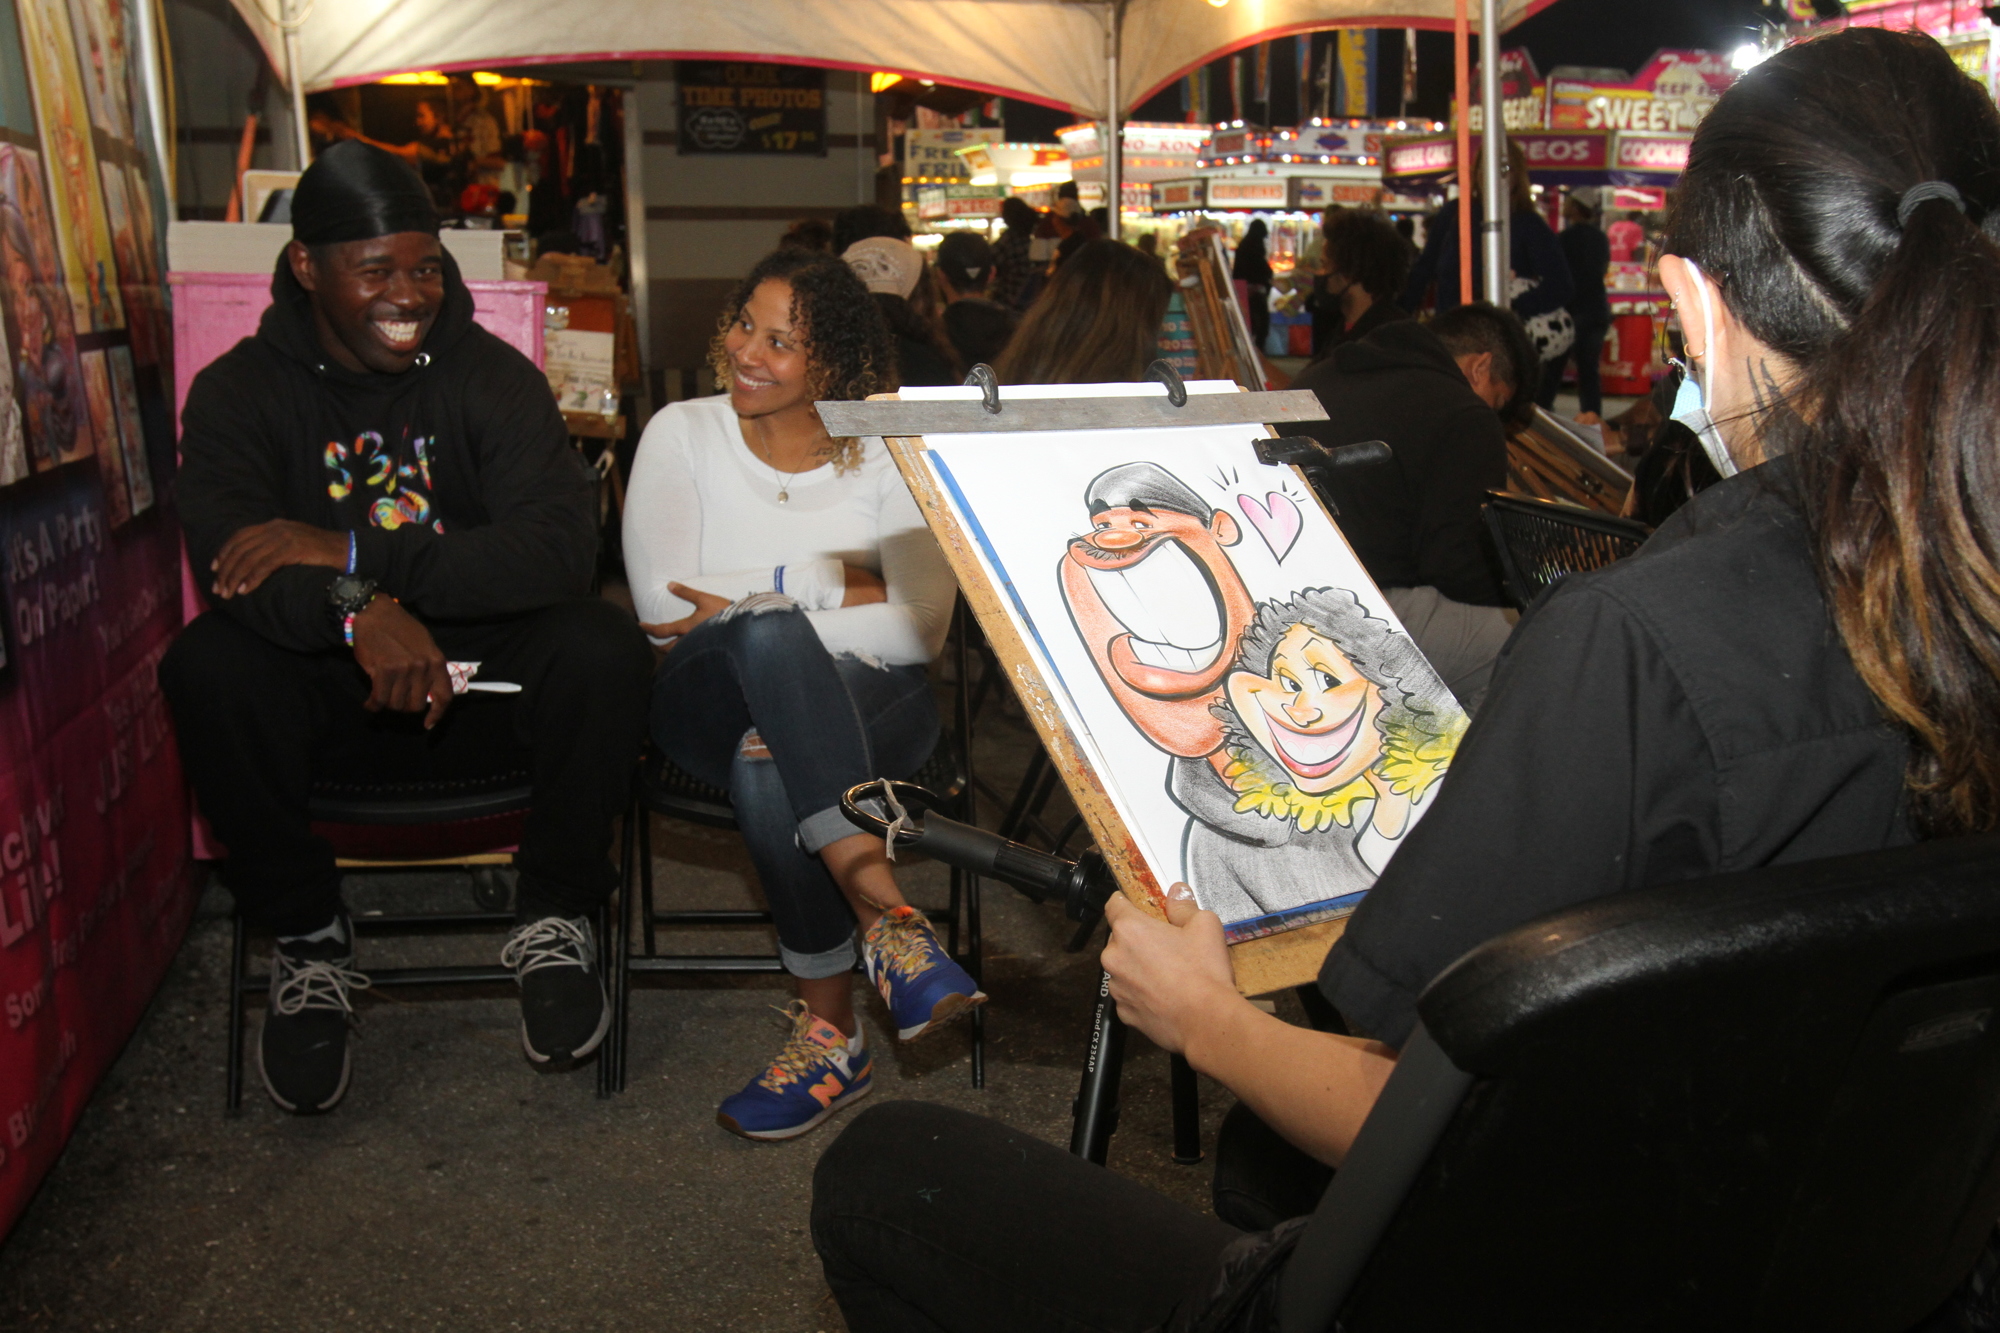 APRIL: Unique Johnson and Alane Murrell have their caricatures drawn.